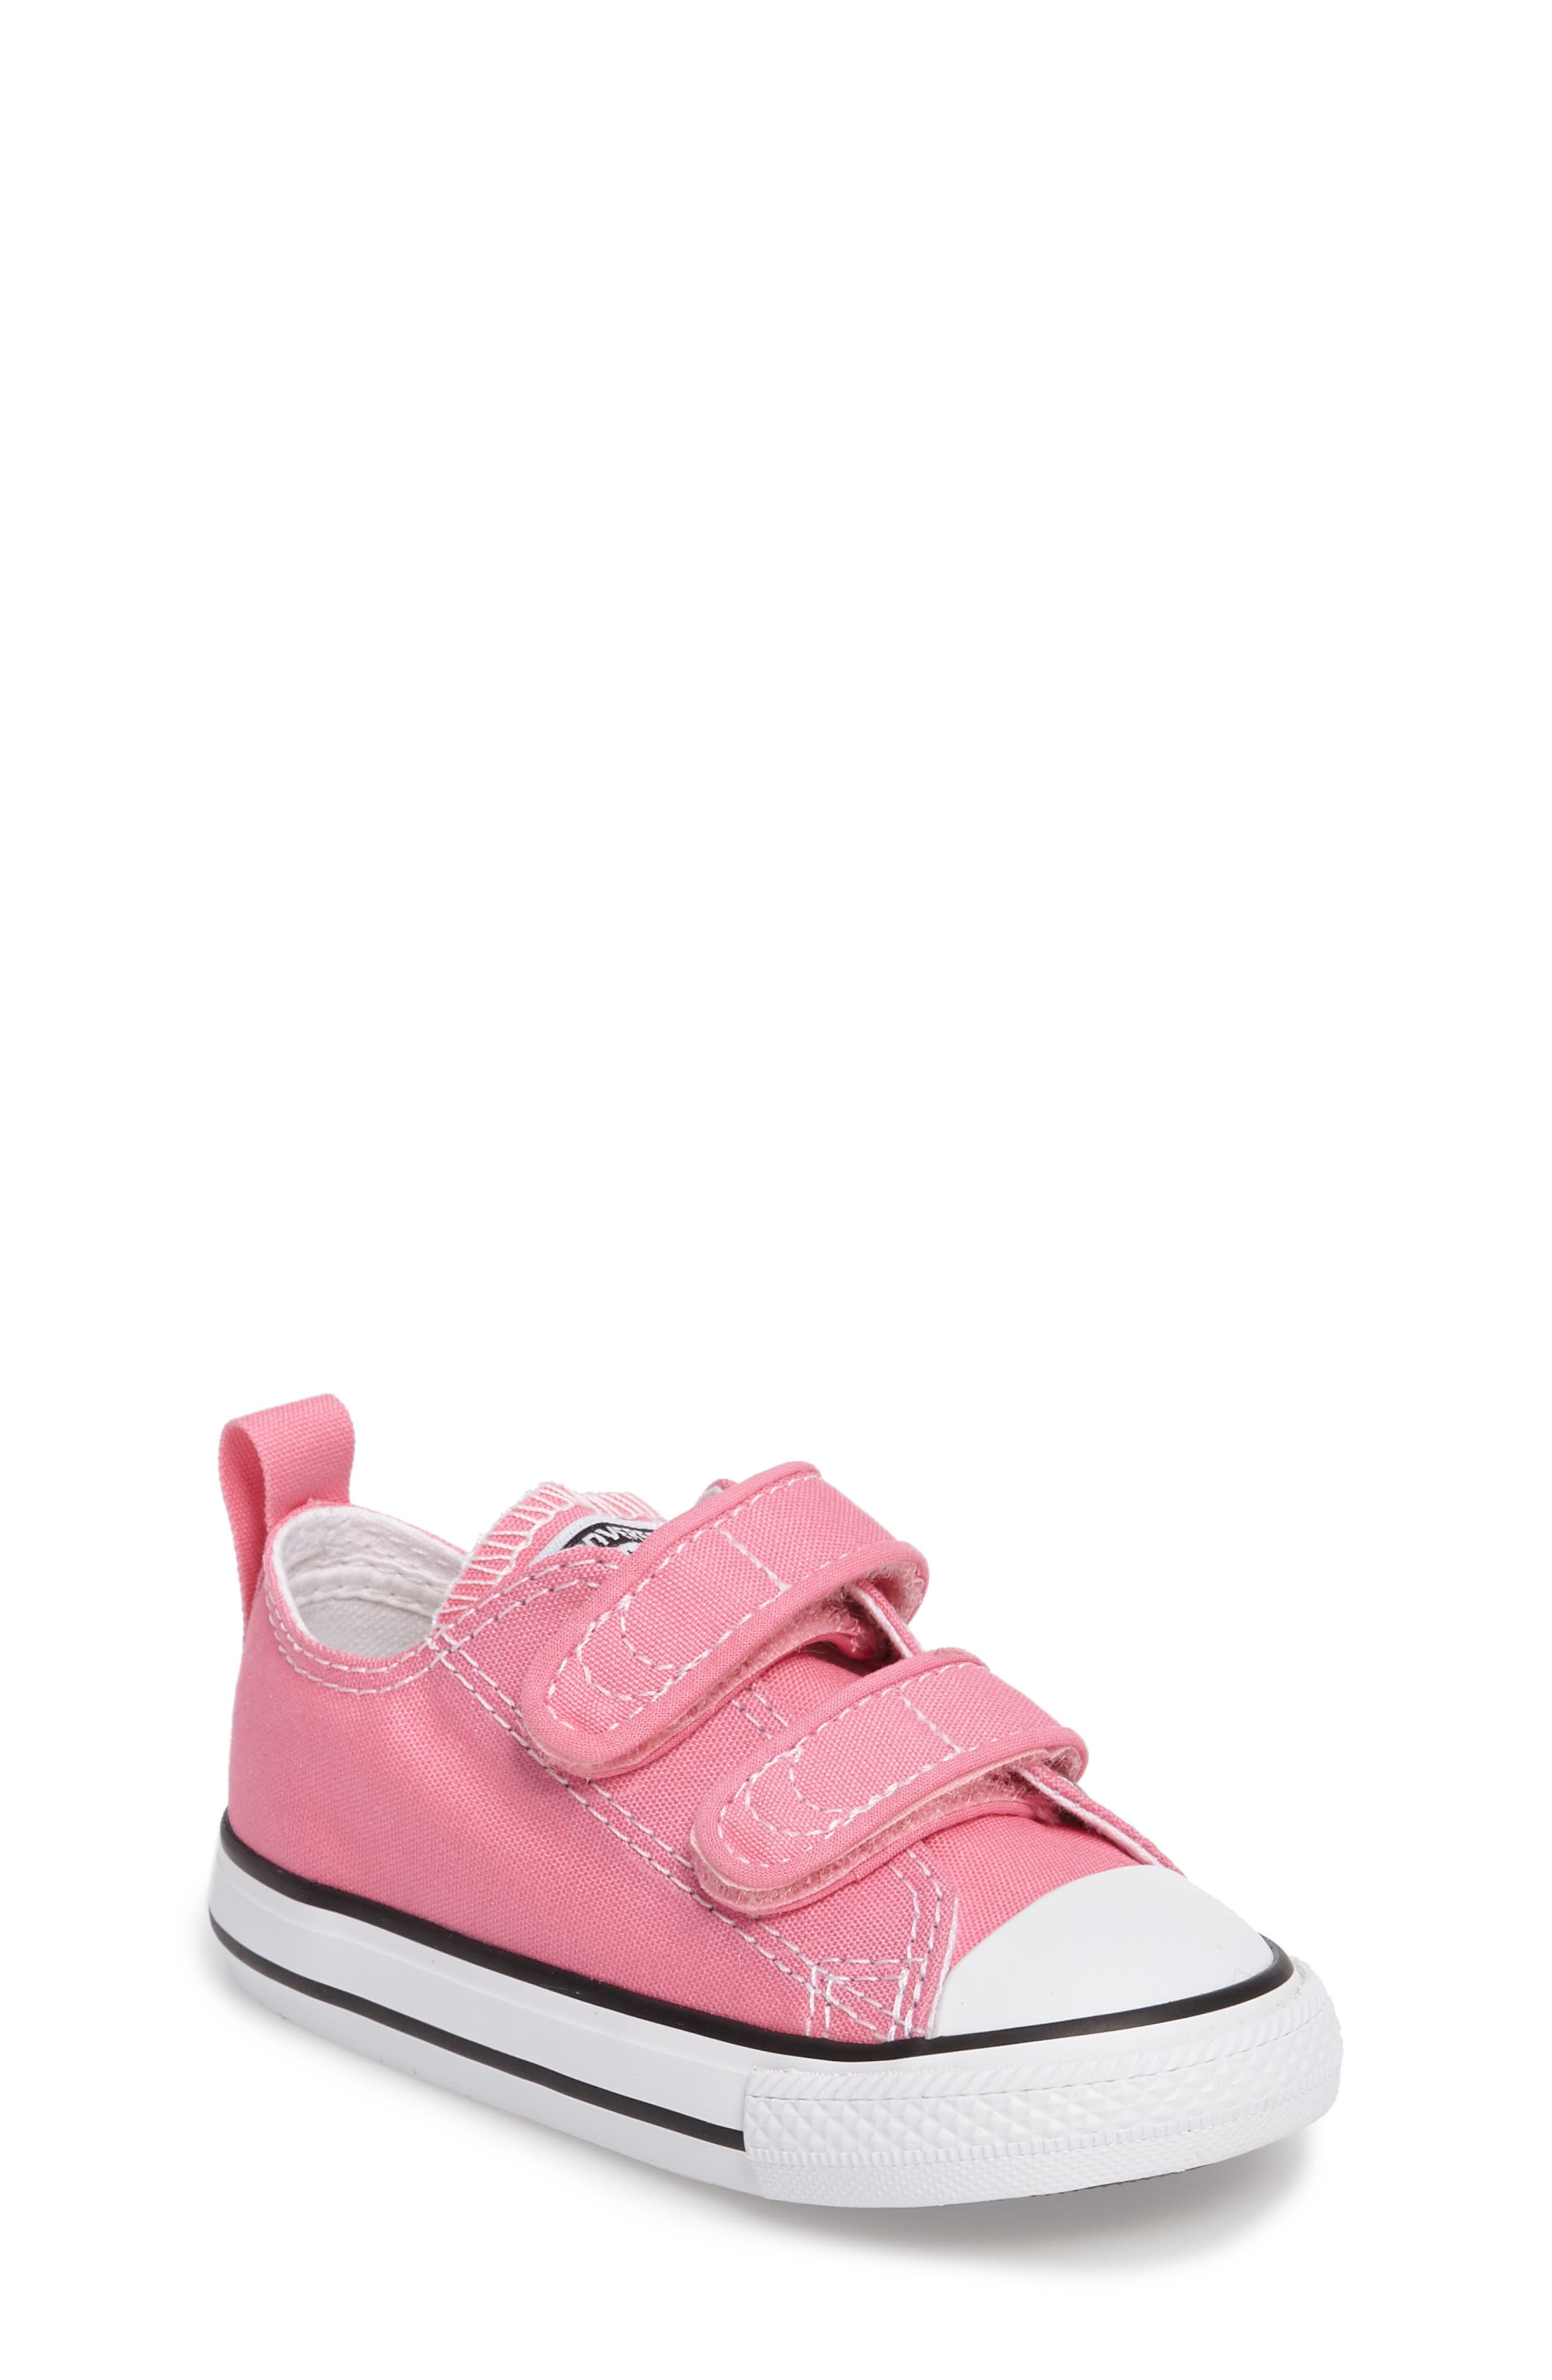 pink baby converse size 4